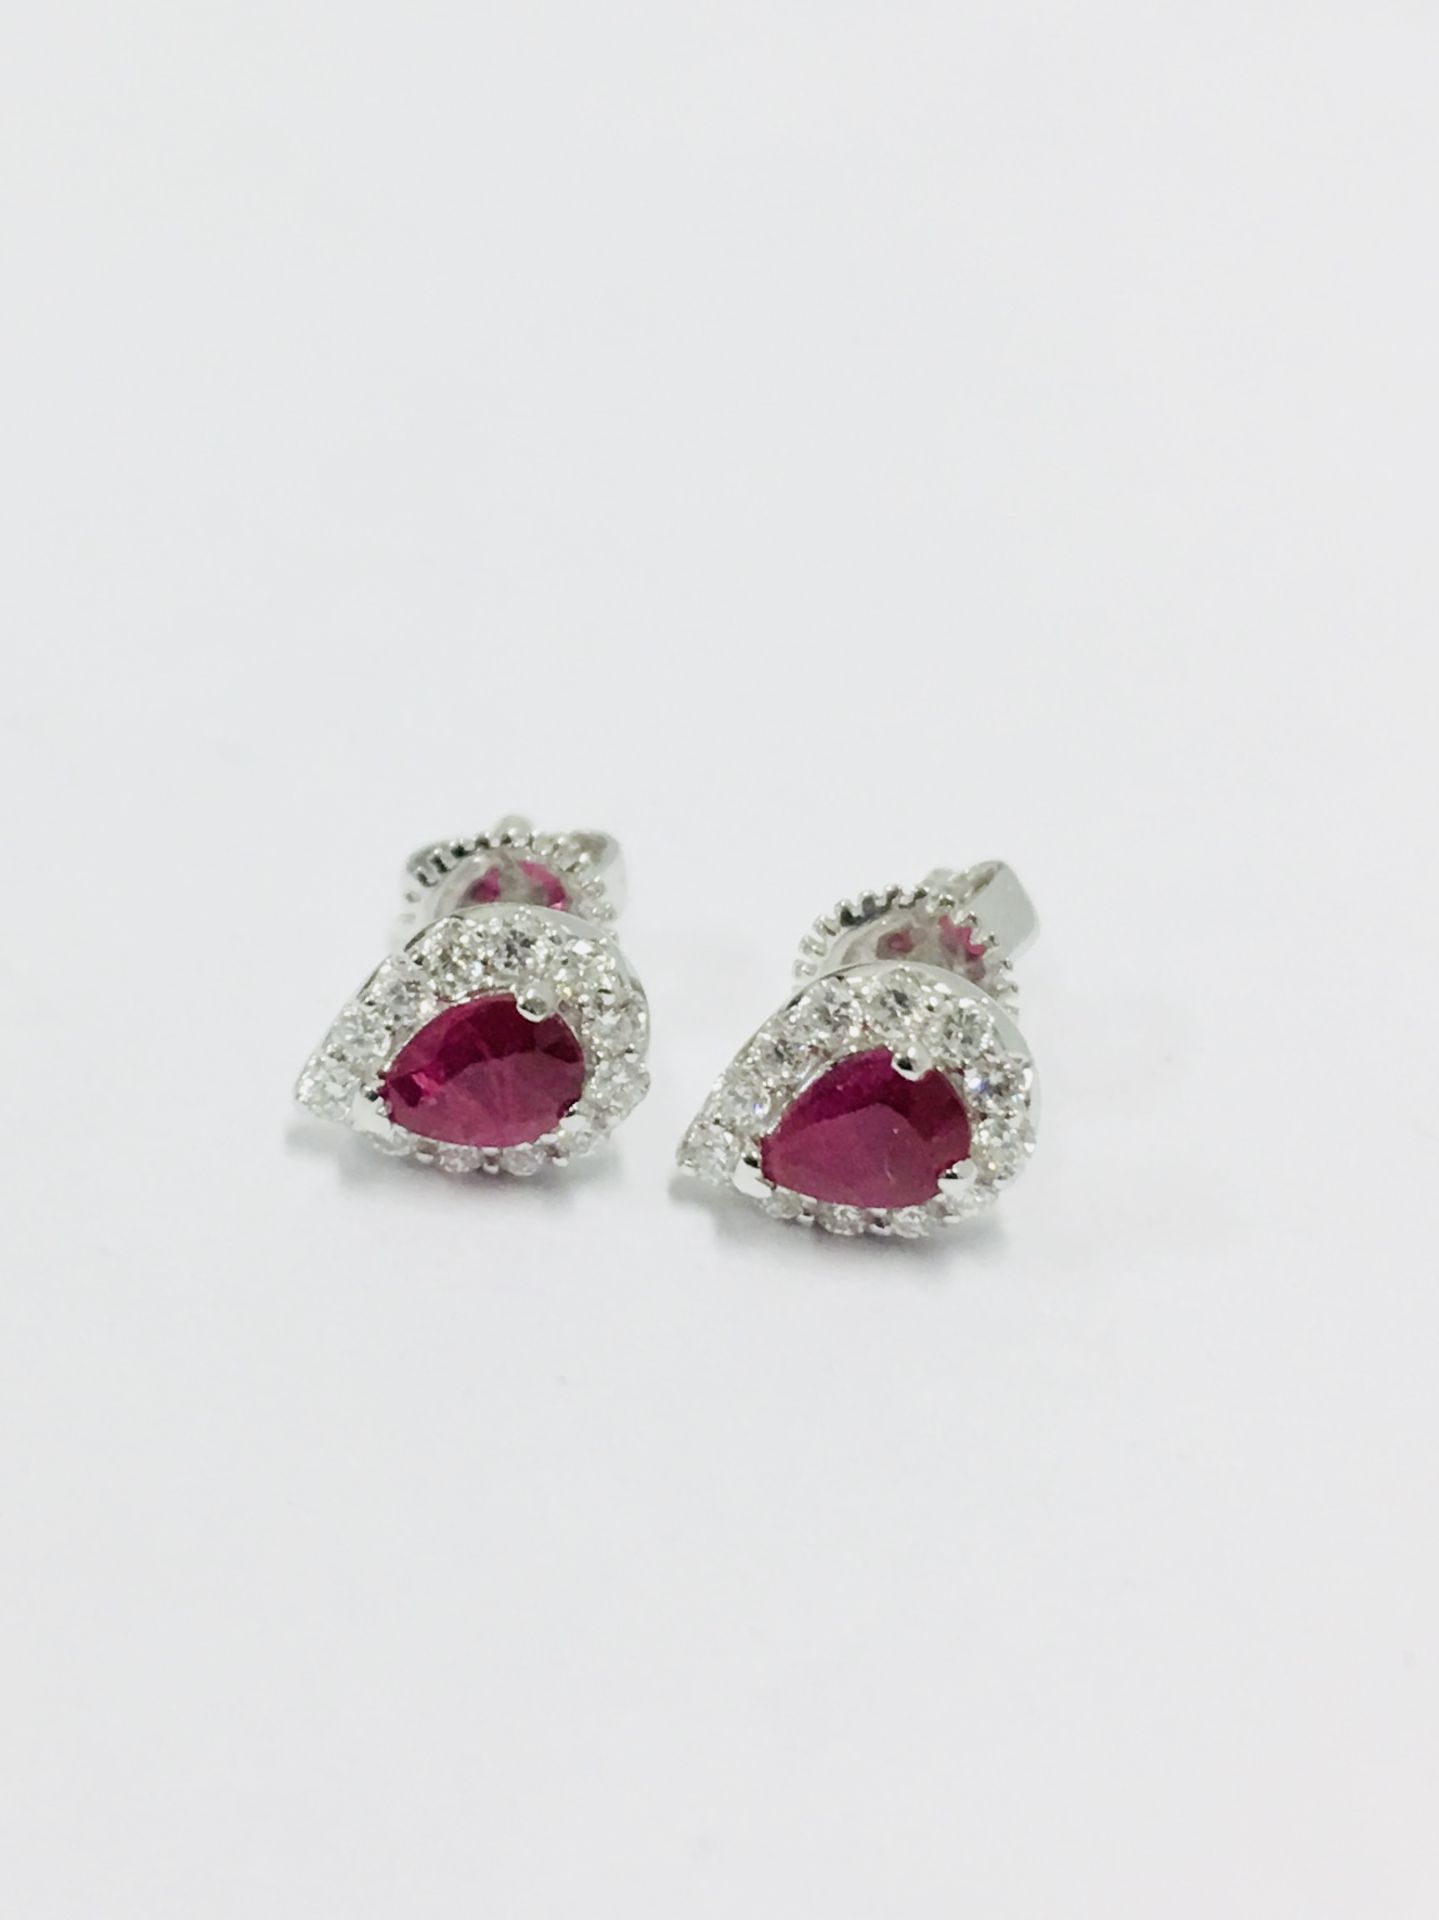 18Ct White Gold Ruby & Diamond Earrings - Image 2 of 3